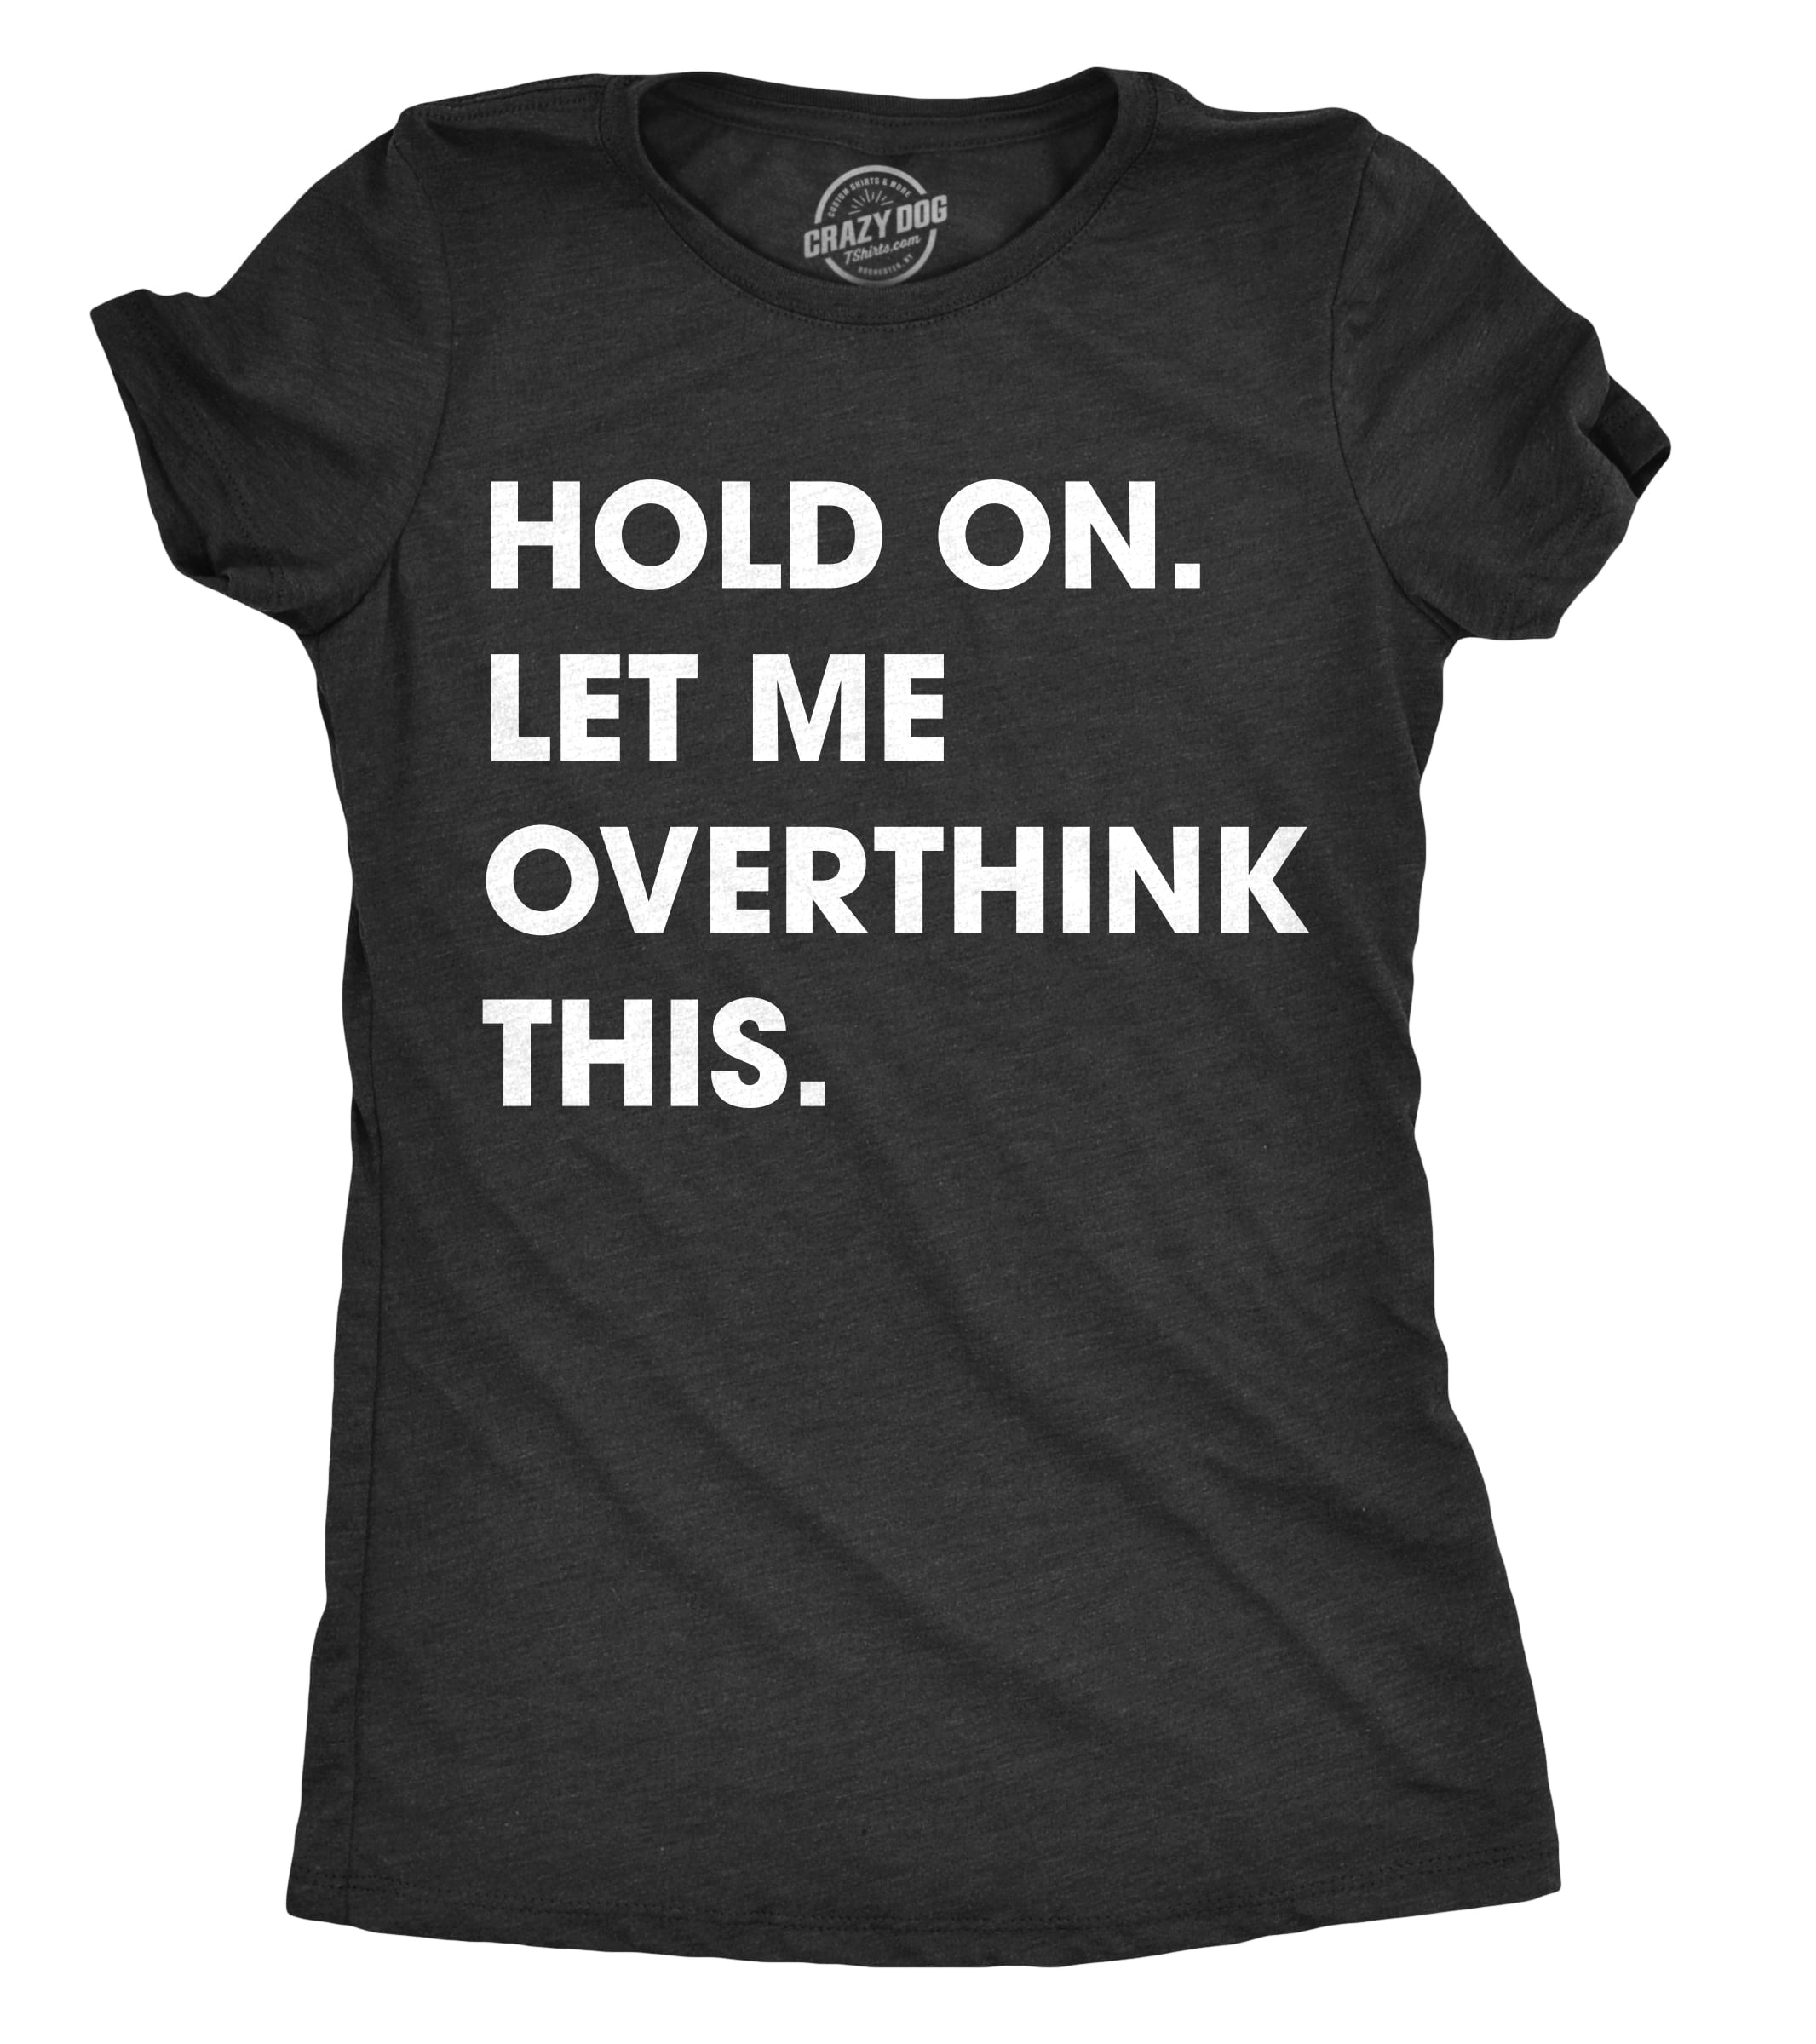 Hold On I've Gotta Overthink About It Shirt Funny Sarcastic Shirt |Momlife Sarcastic Shirt Hold on Let Me Overthink This Funny Shirt